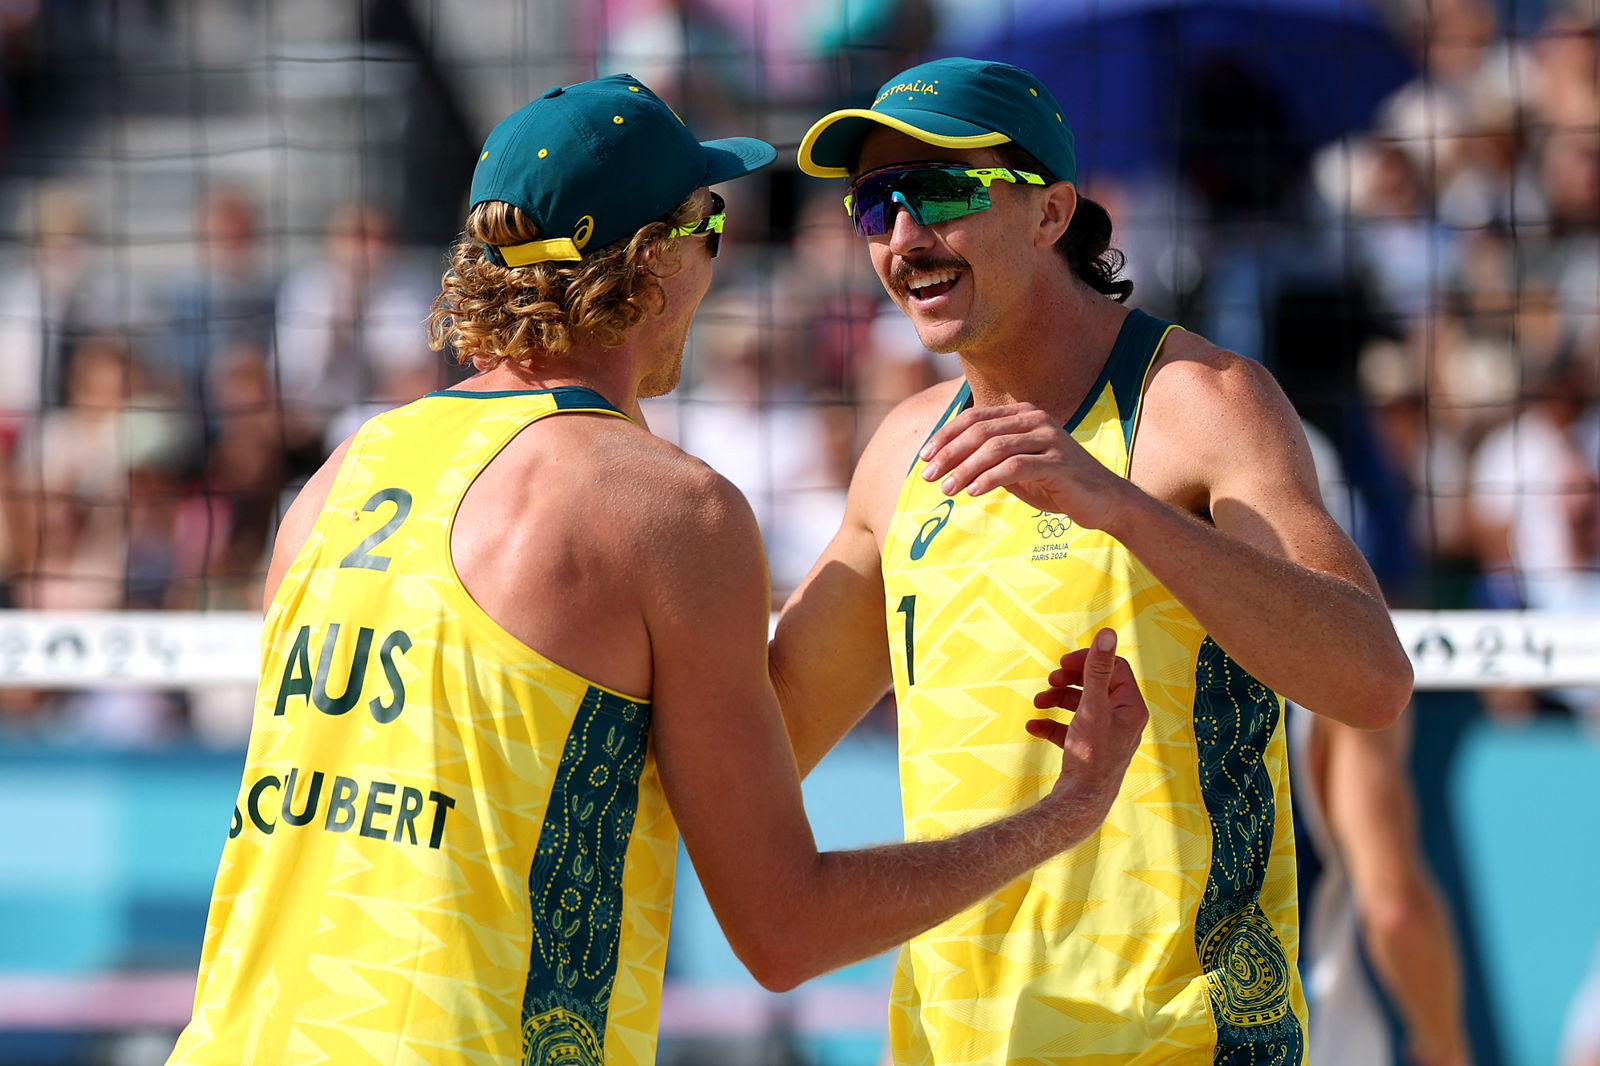 Tom Hodges and Zach Schubert hug in the beach volleyball at the Paris Olympics.